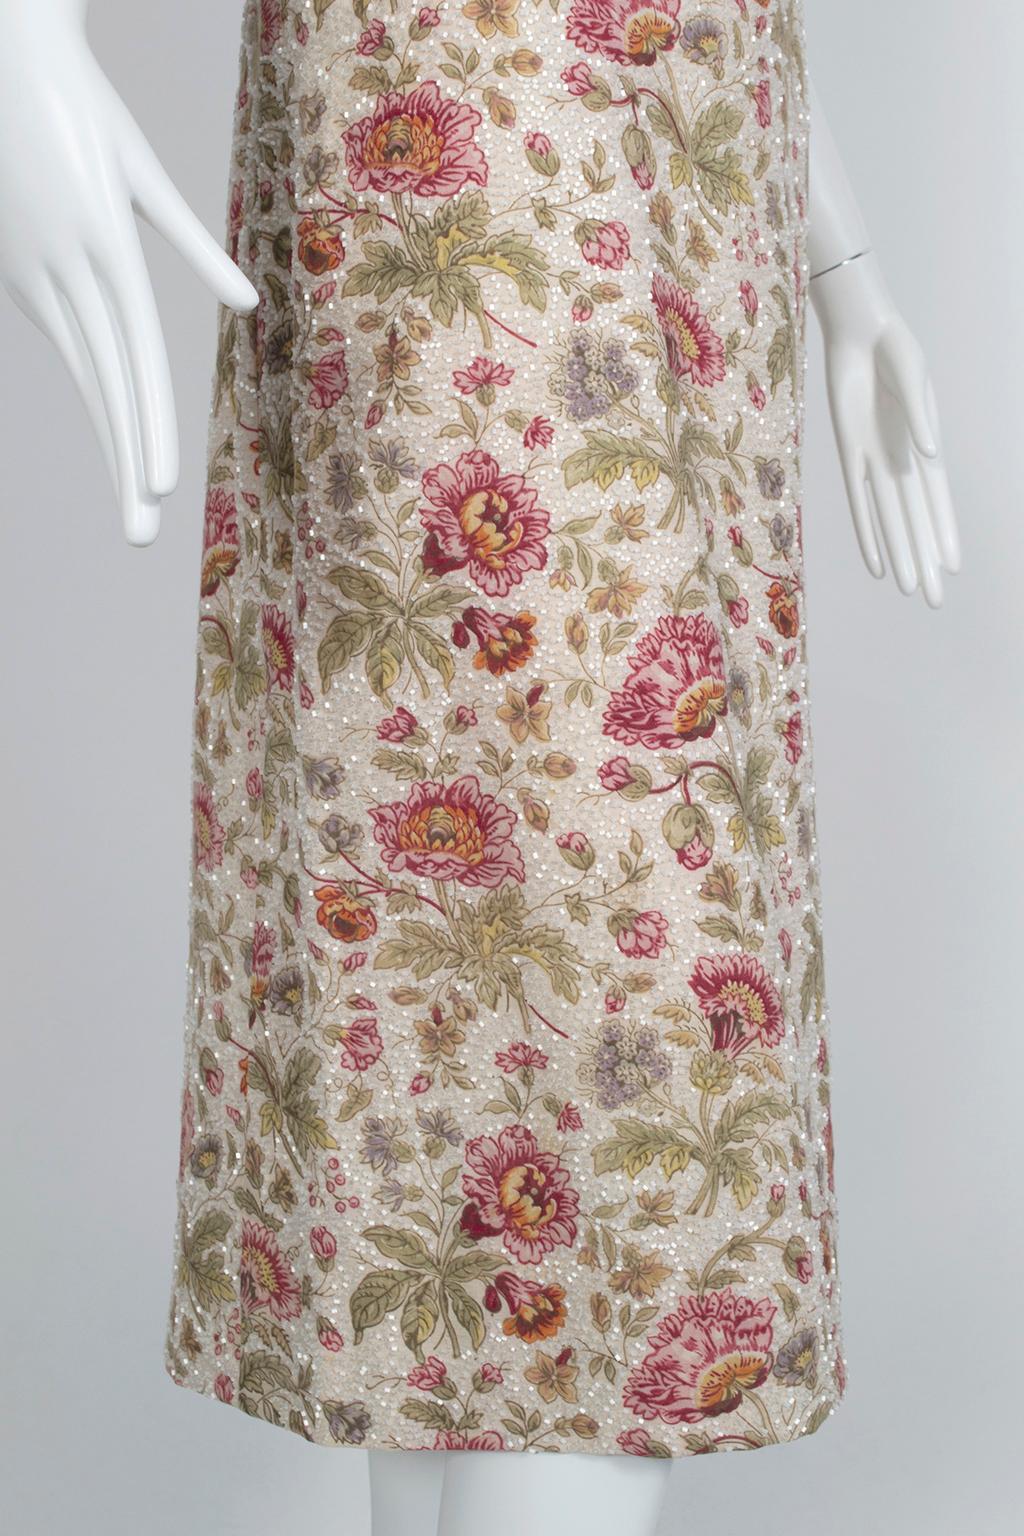 Sleeveless Plum Floral Glass Bead Sack Dress with Gold Piping - M, 1920s In Good Condition For Sale In Tucson, AZ